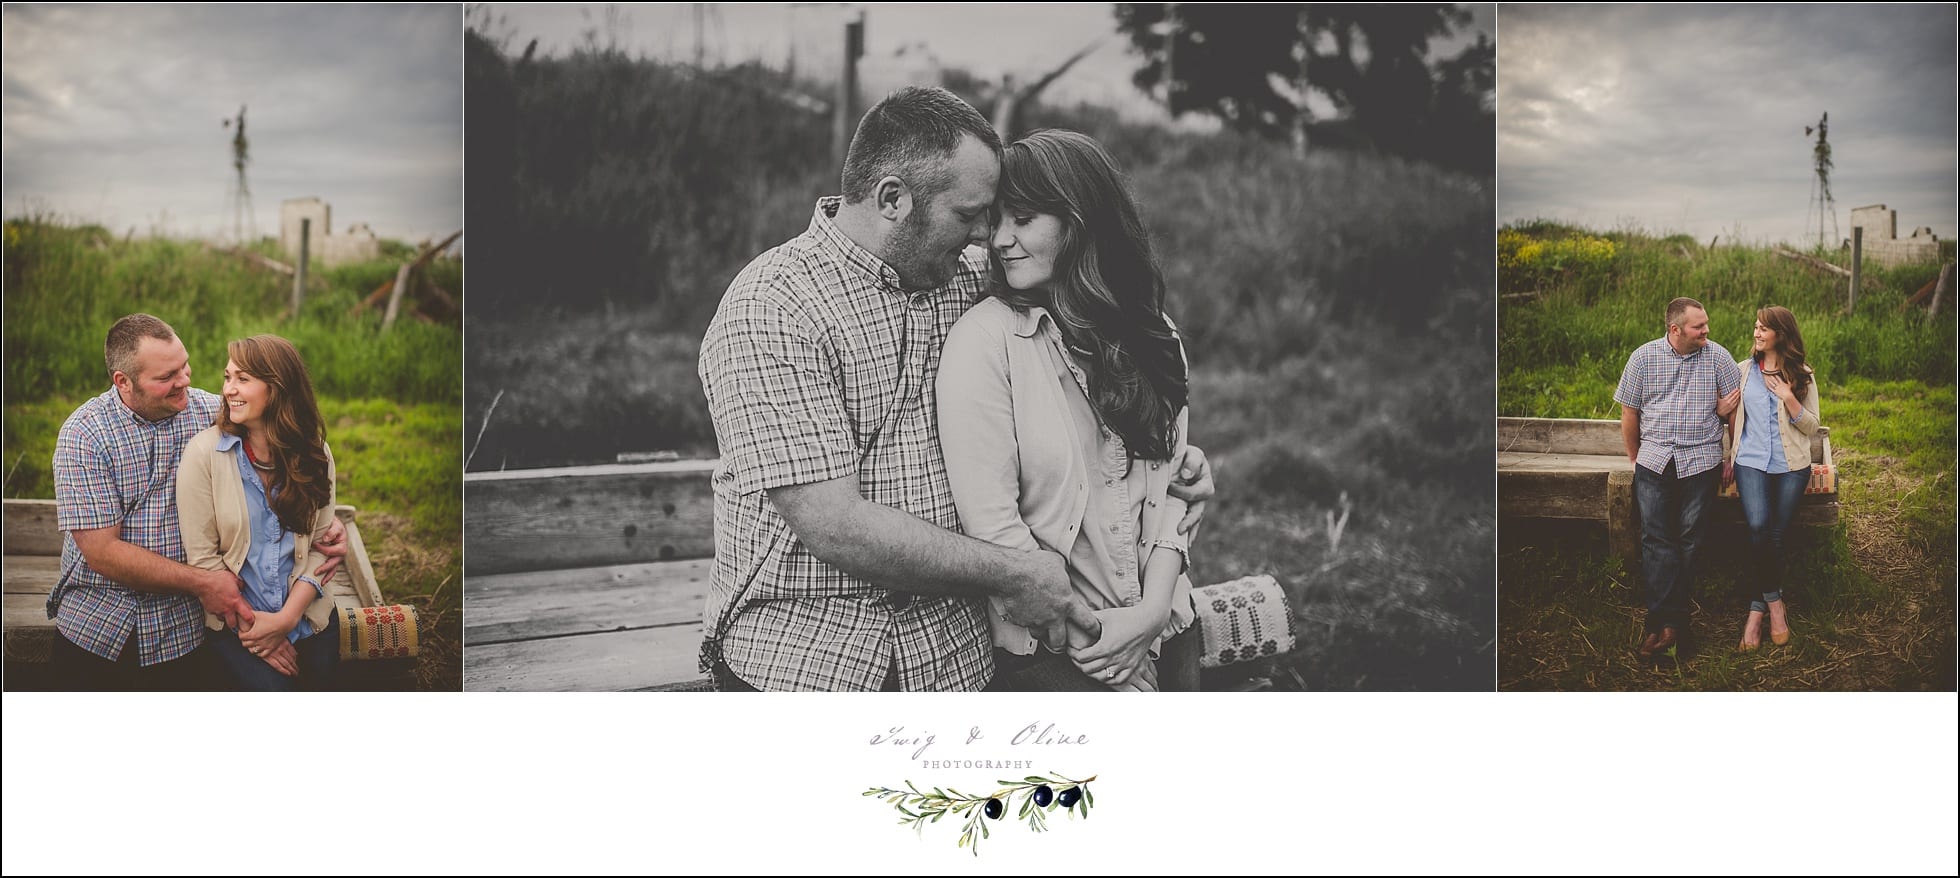 country sessions, engagement sessions, black and white photography, farm and field photography, outdoor sessions, Twig and Olive photography engagements